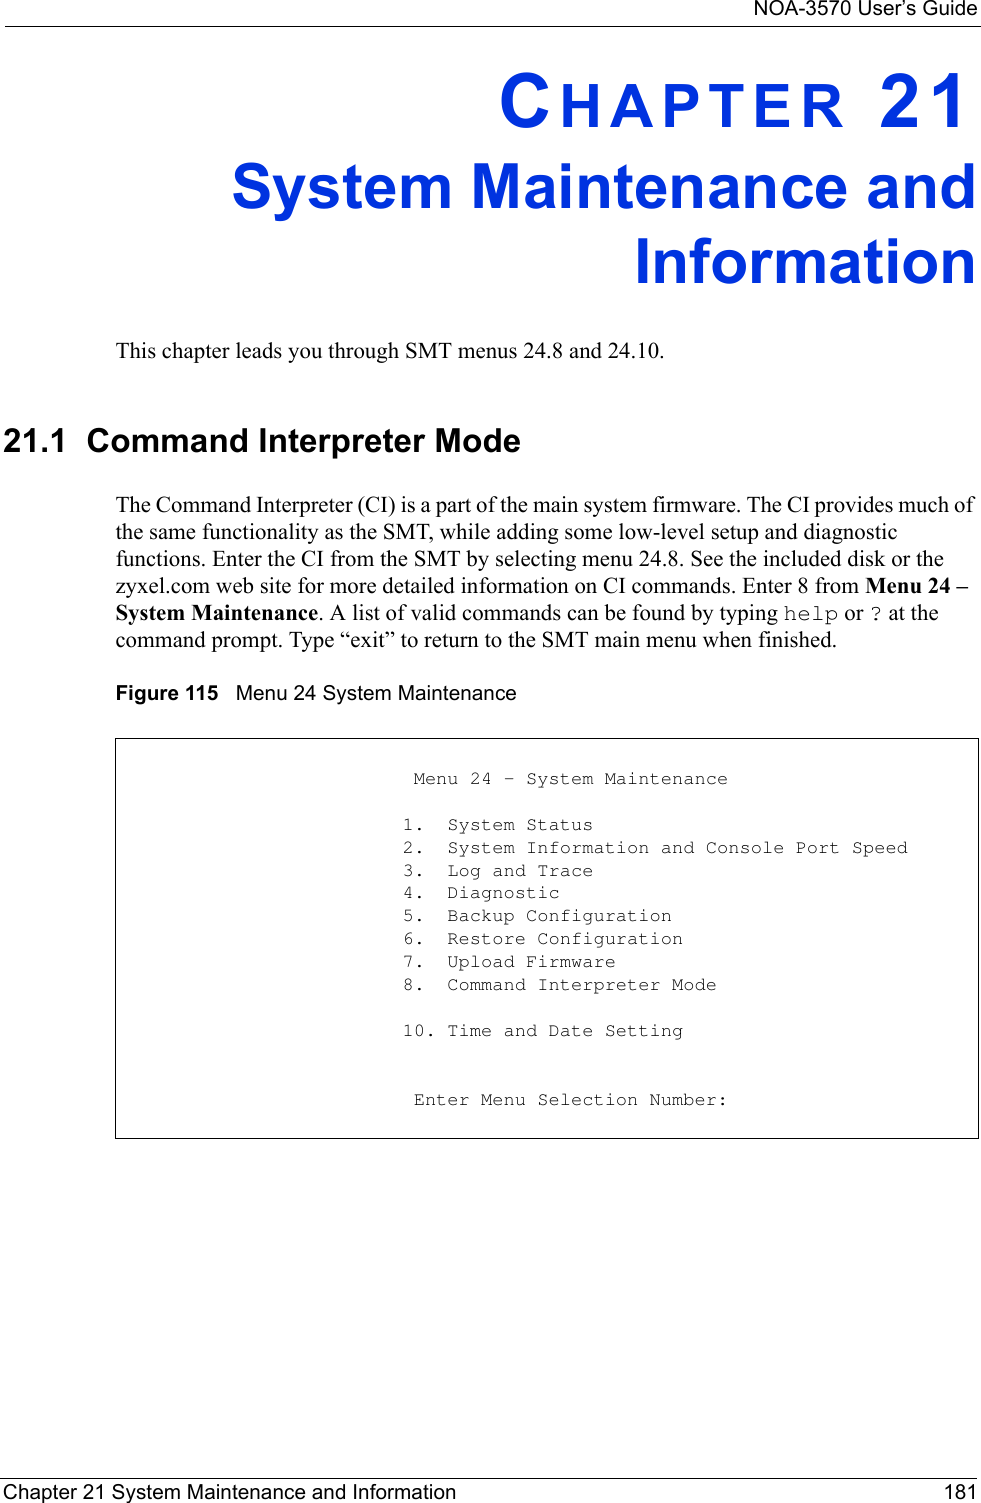 NOA-3570 User’s GuideChapter 21 System Maintenance and Information 181CHAPTER 21System Maintenance andInformationThis chapter leads you through SMT menus 24.8 and 24.10.21.1  Command Interpreter ModeThe Command Interpreter (CI) is a part of the main system firmware. The CI provides much of the same functionality as the SMT, while adding some low-level setup and diagnostic functions. Enter the CI from the SMT by selecting menu 24.8. See the included disk or the zyxel.com web site for more detailed information on CI commands. Enter 8 from Menu 24 – System Maintenance. A list of valid commands can be found by typing help or ? at the command prompt. Type “exit” to return to the SMT main menu when finished.Figure 115   Menu 24 System Maintenance                          Menu 24 - System Maintenance                         1.  System Status                         2.  System Information and Console Port Speed                         3.  Log and Trace                         4.  Diagnostic                         5.  Backup Configuration                         6.  Restore Configuration                         7.  Upload Firmware                         8.  Command Interpreter Mode                         10. Time and Date Setting                          Enter Menu Selection Number: